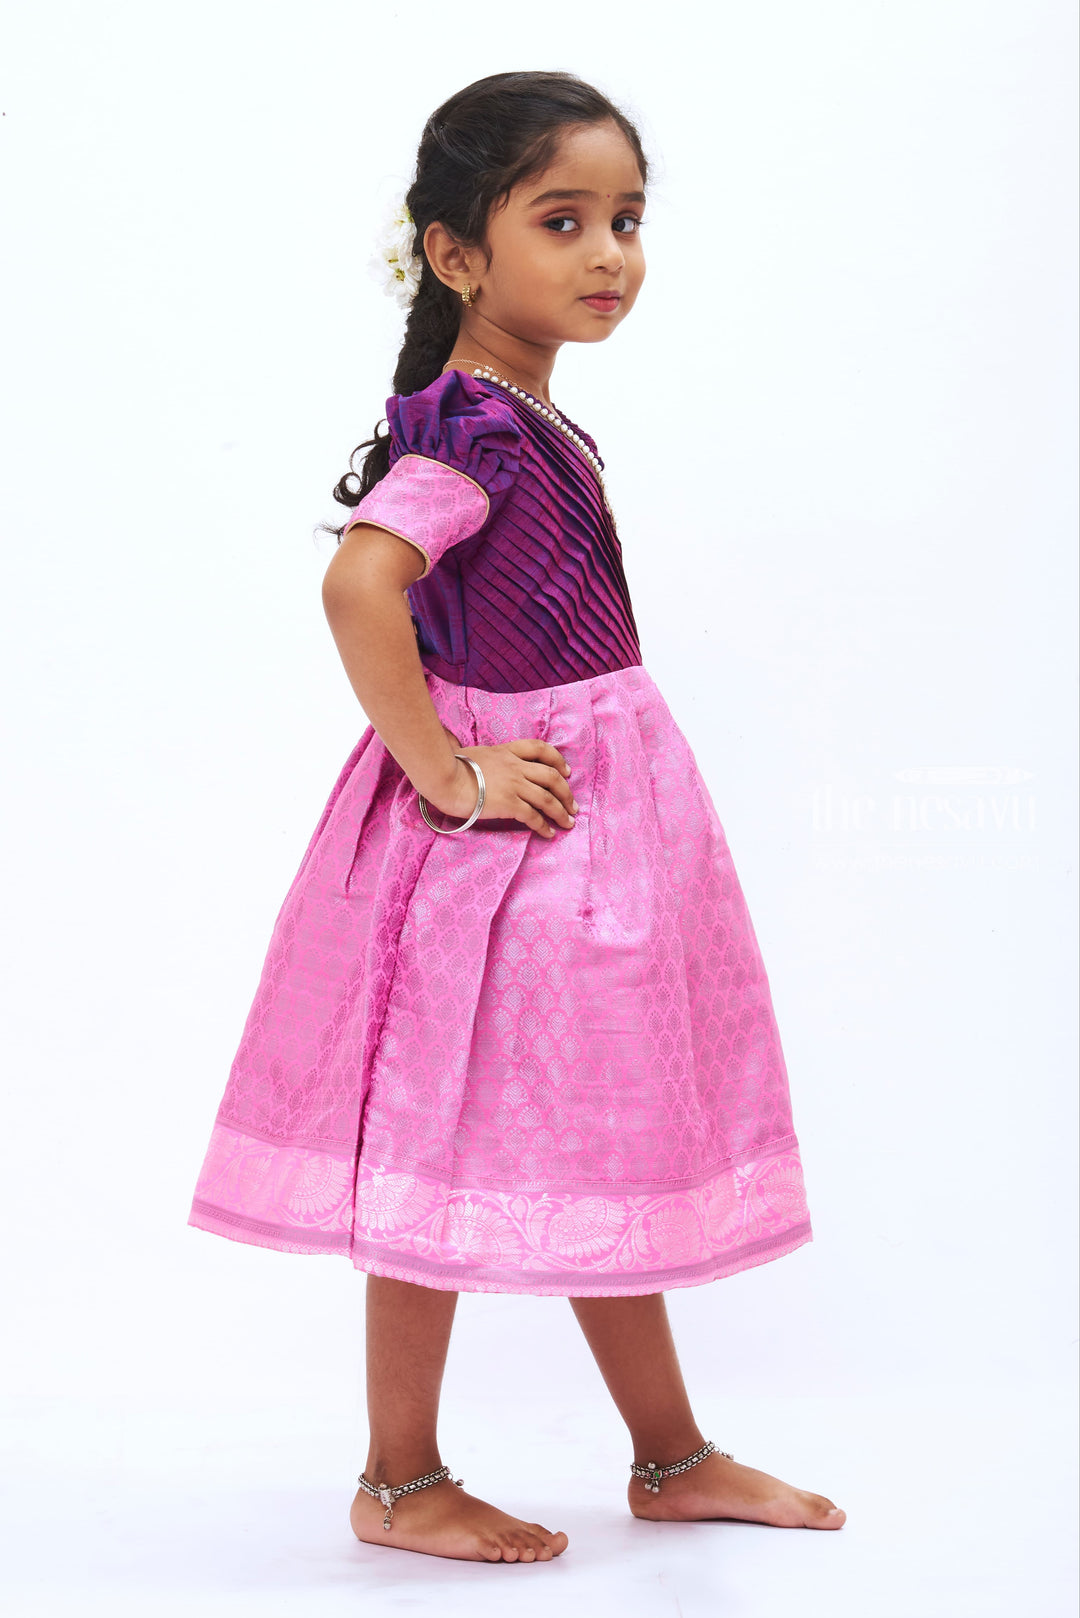 The Nesavu Silk Frock Majestic Purple & Pink Dress: Traditional Indian Wear with Modern Flair for Girls Nesavu Girls Traditional Dress | Elegant Indian Silk Frock for Kids | The Nesavu